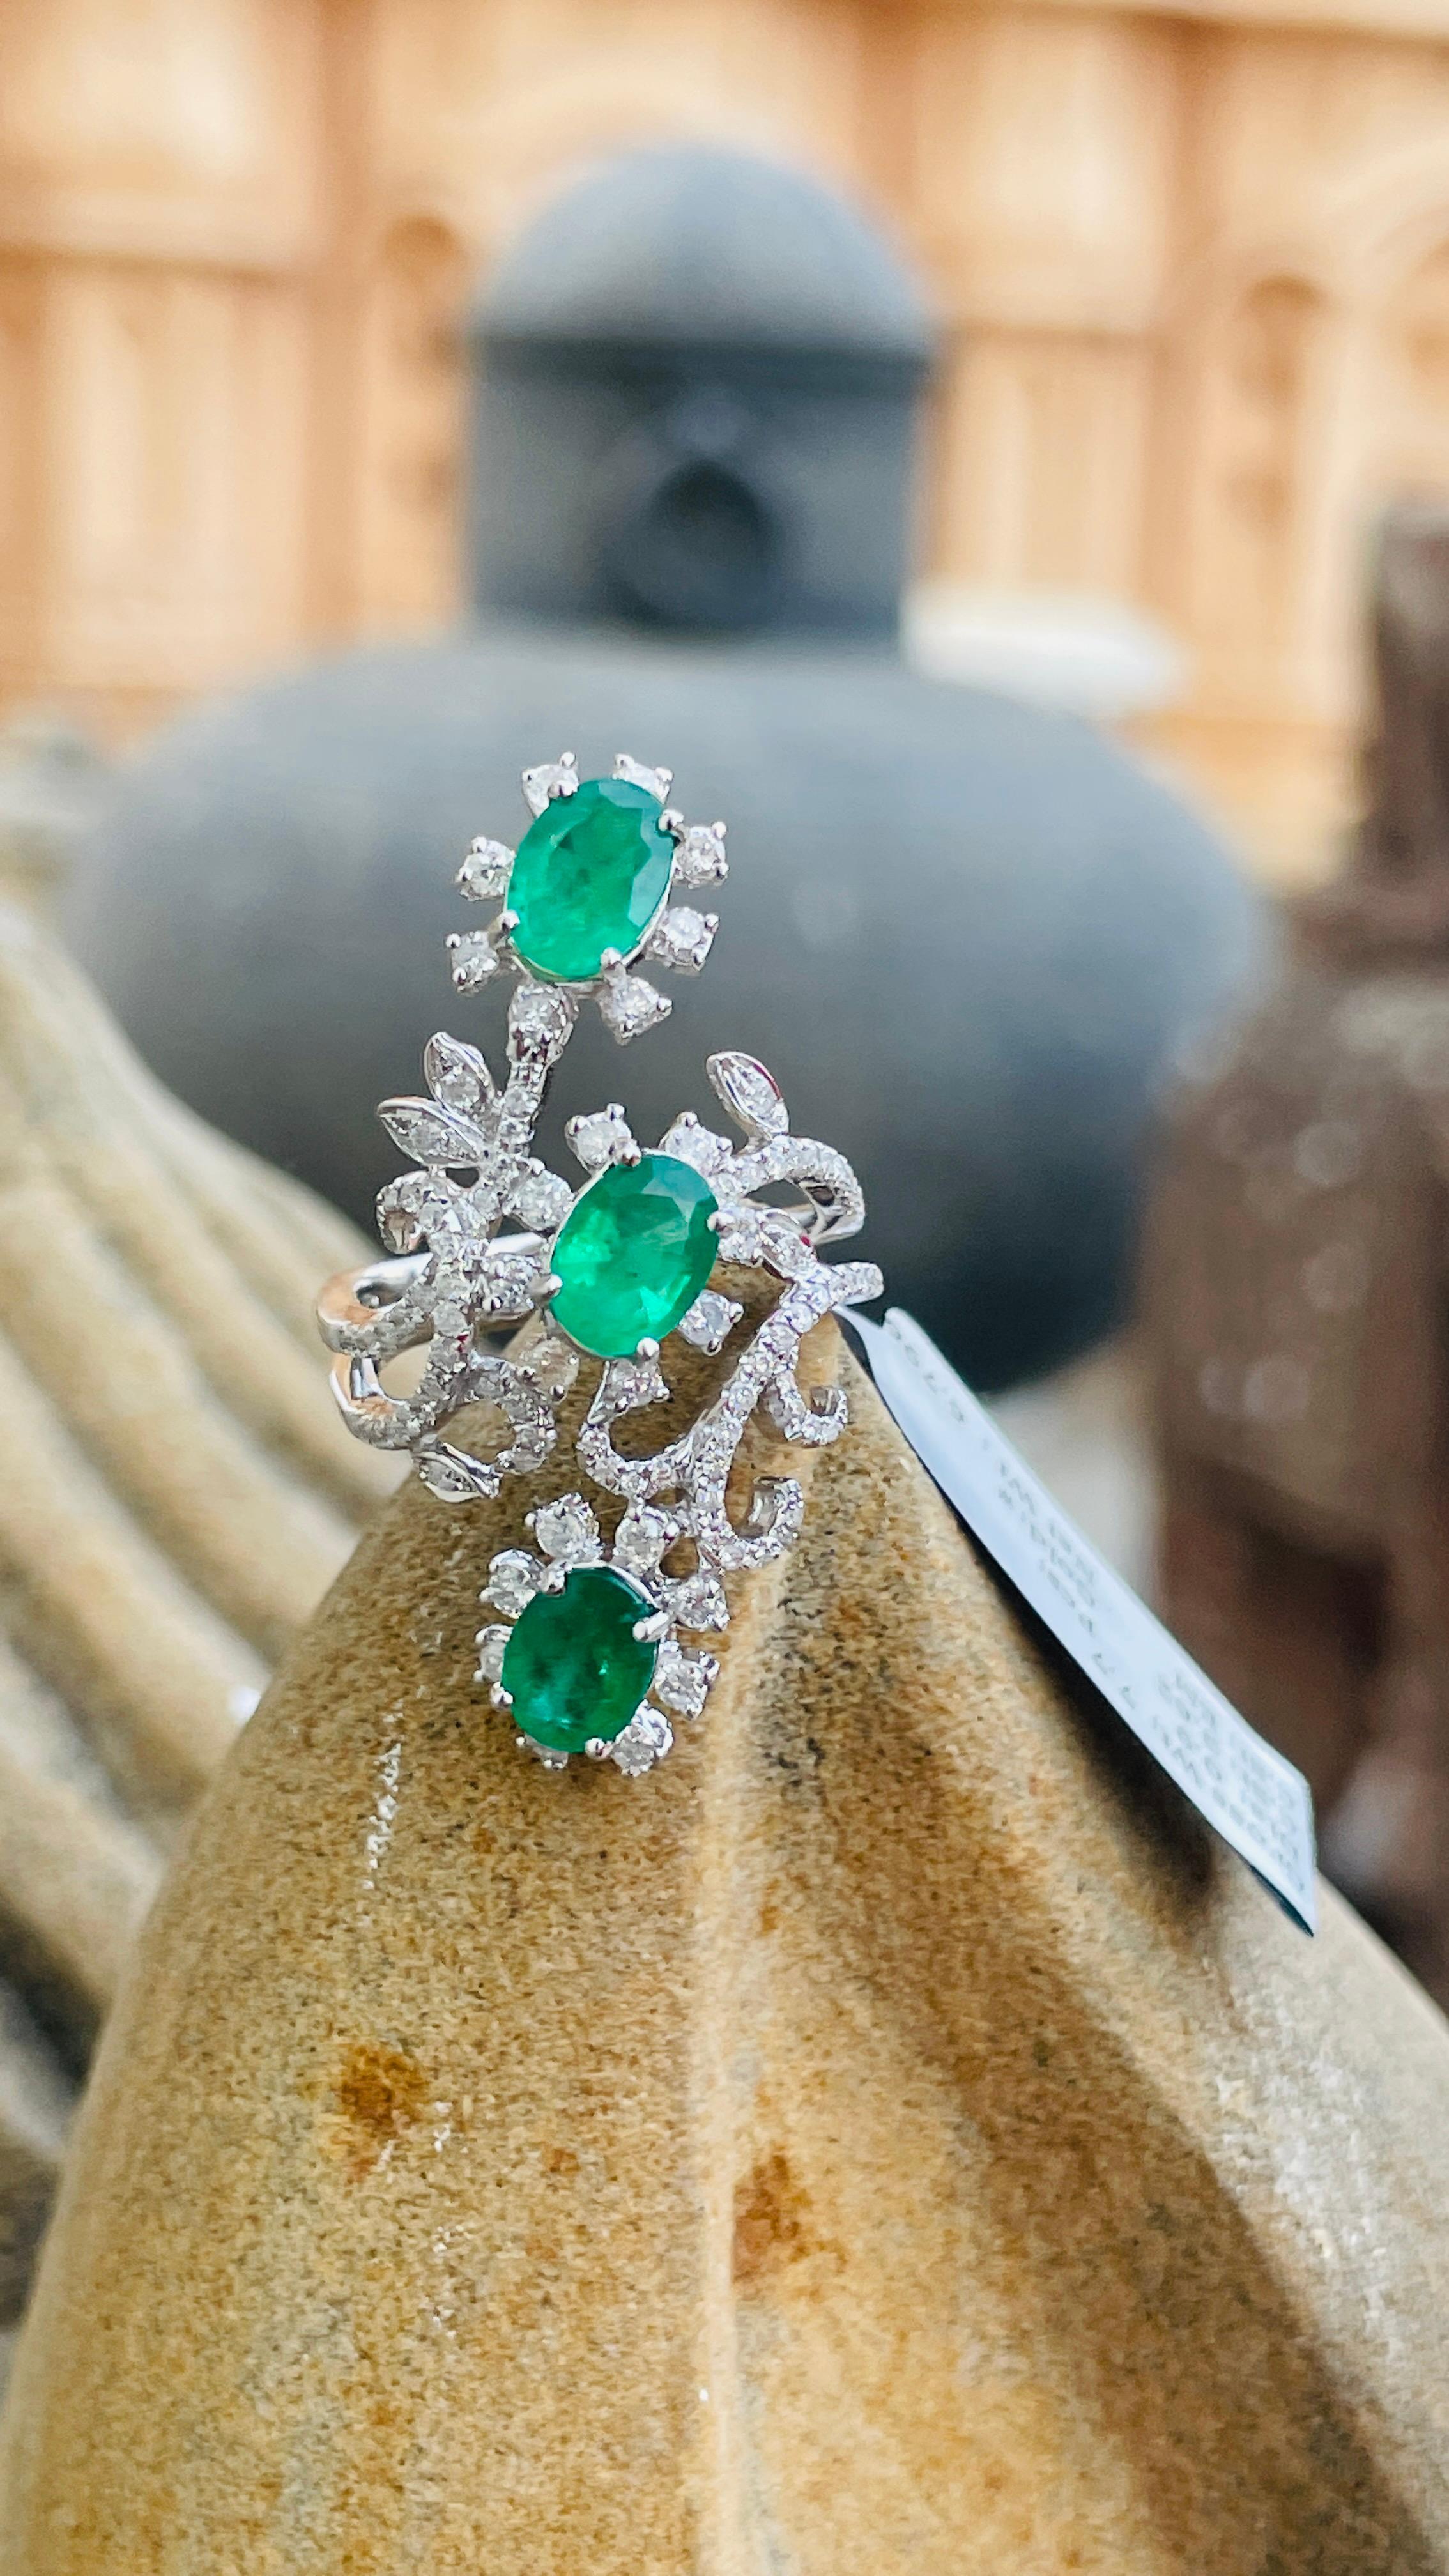 For Sale:  14K White Gold Three Stone Emerald and Diamond Cocktail Ring 7